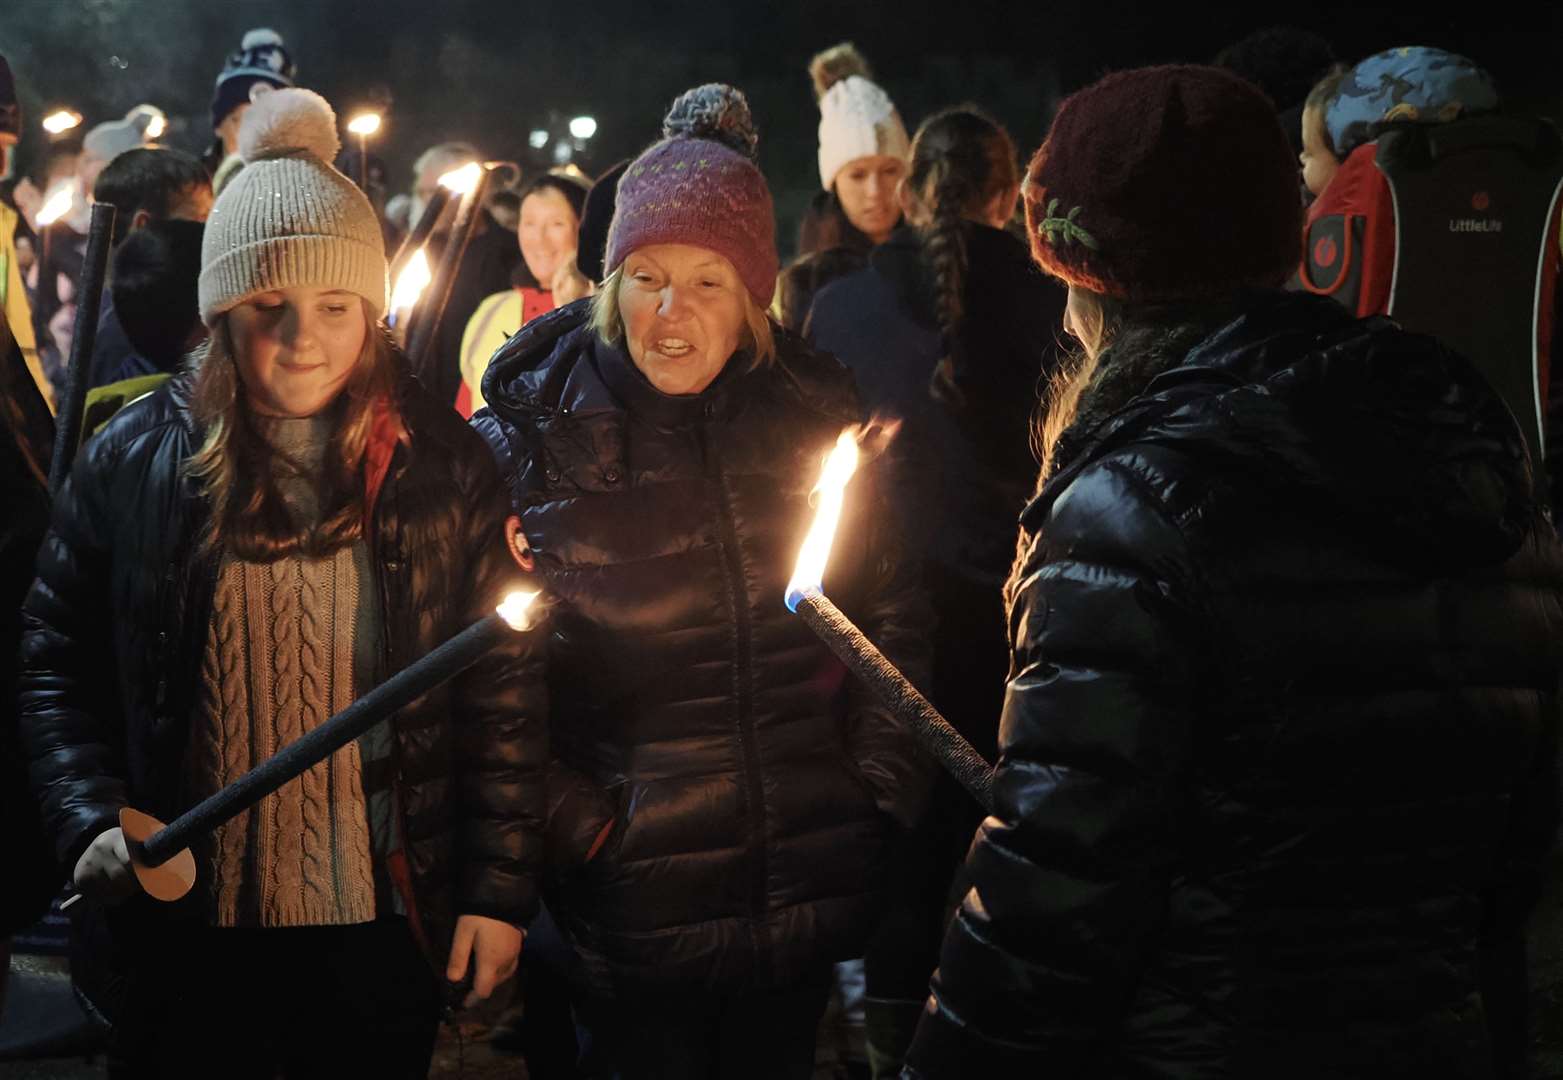 The evening began with a torchlit procession from Dornoch square. Photo: Peter Wild